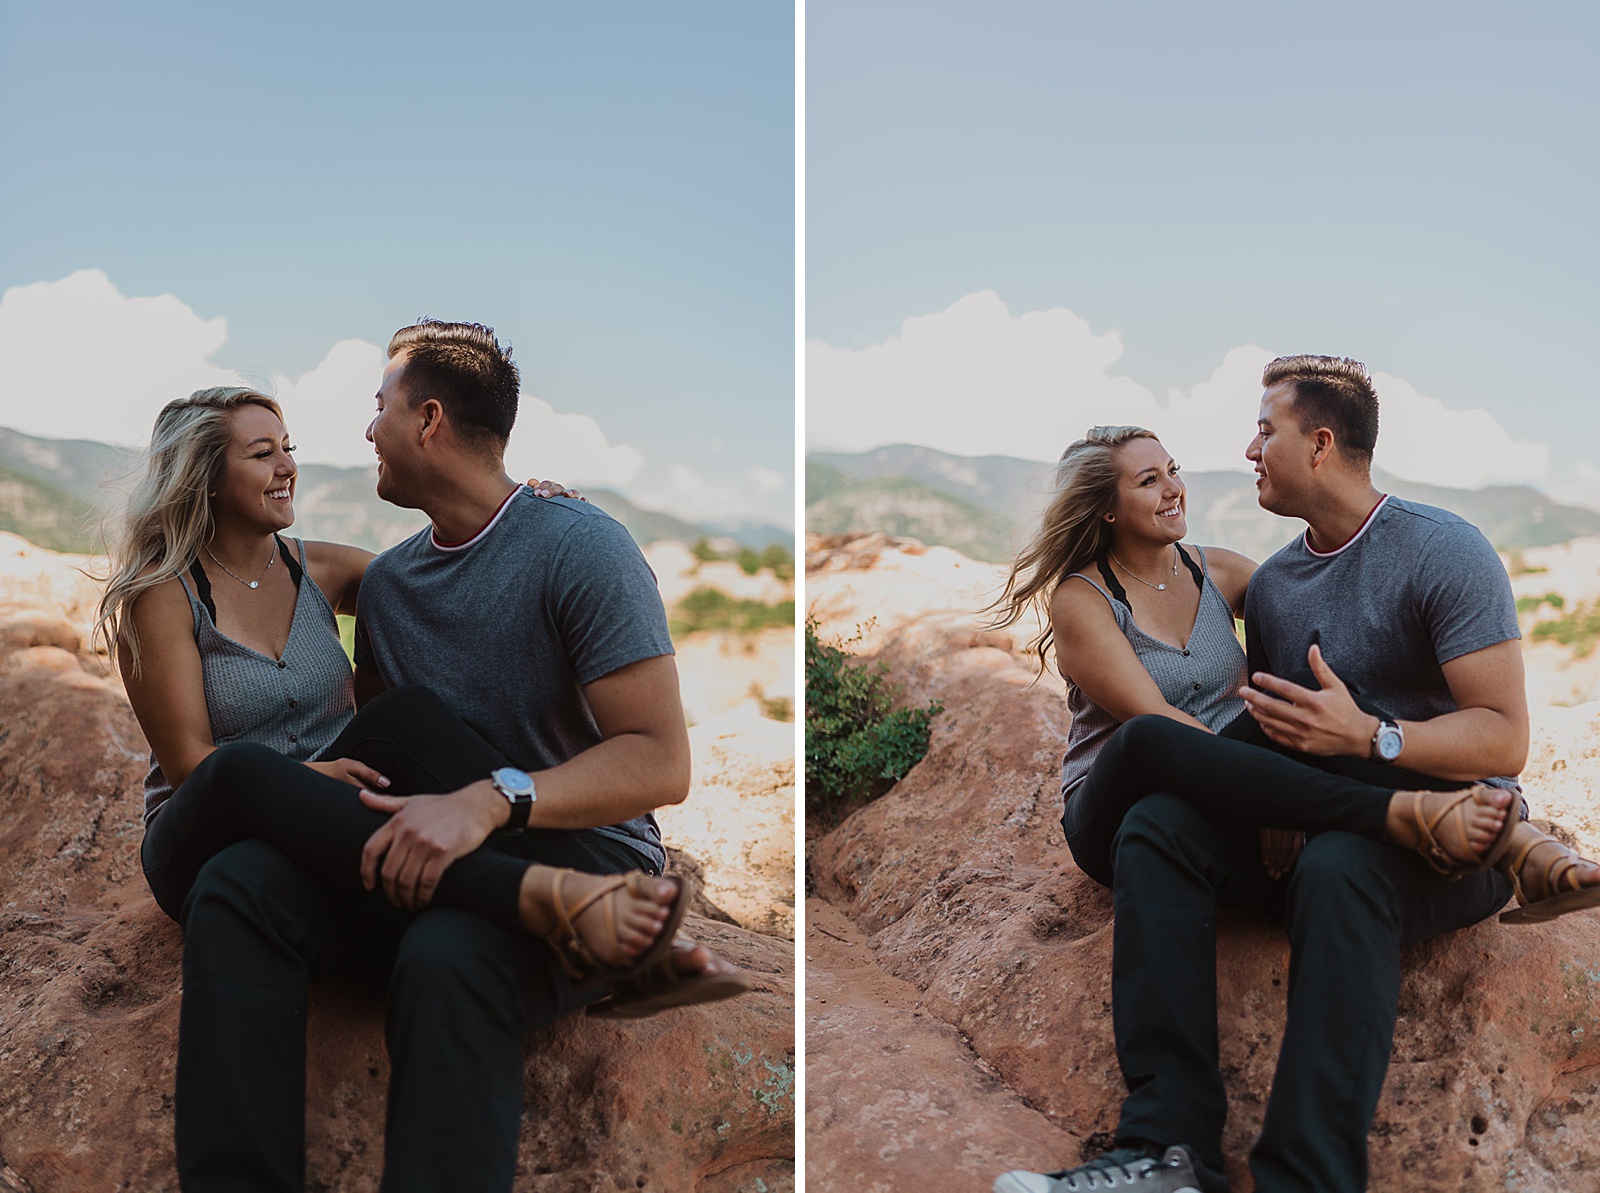 Laid back Red Rock Canyon engagement photos by Caitlyn Cloud Photography